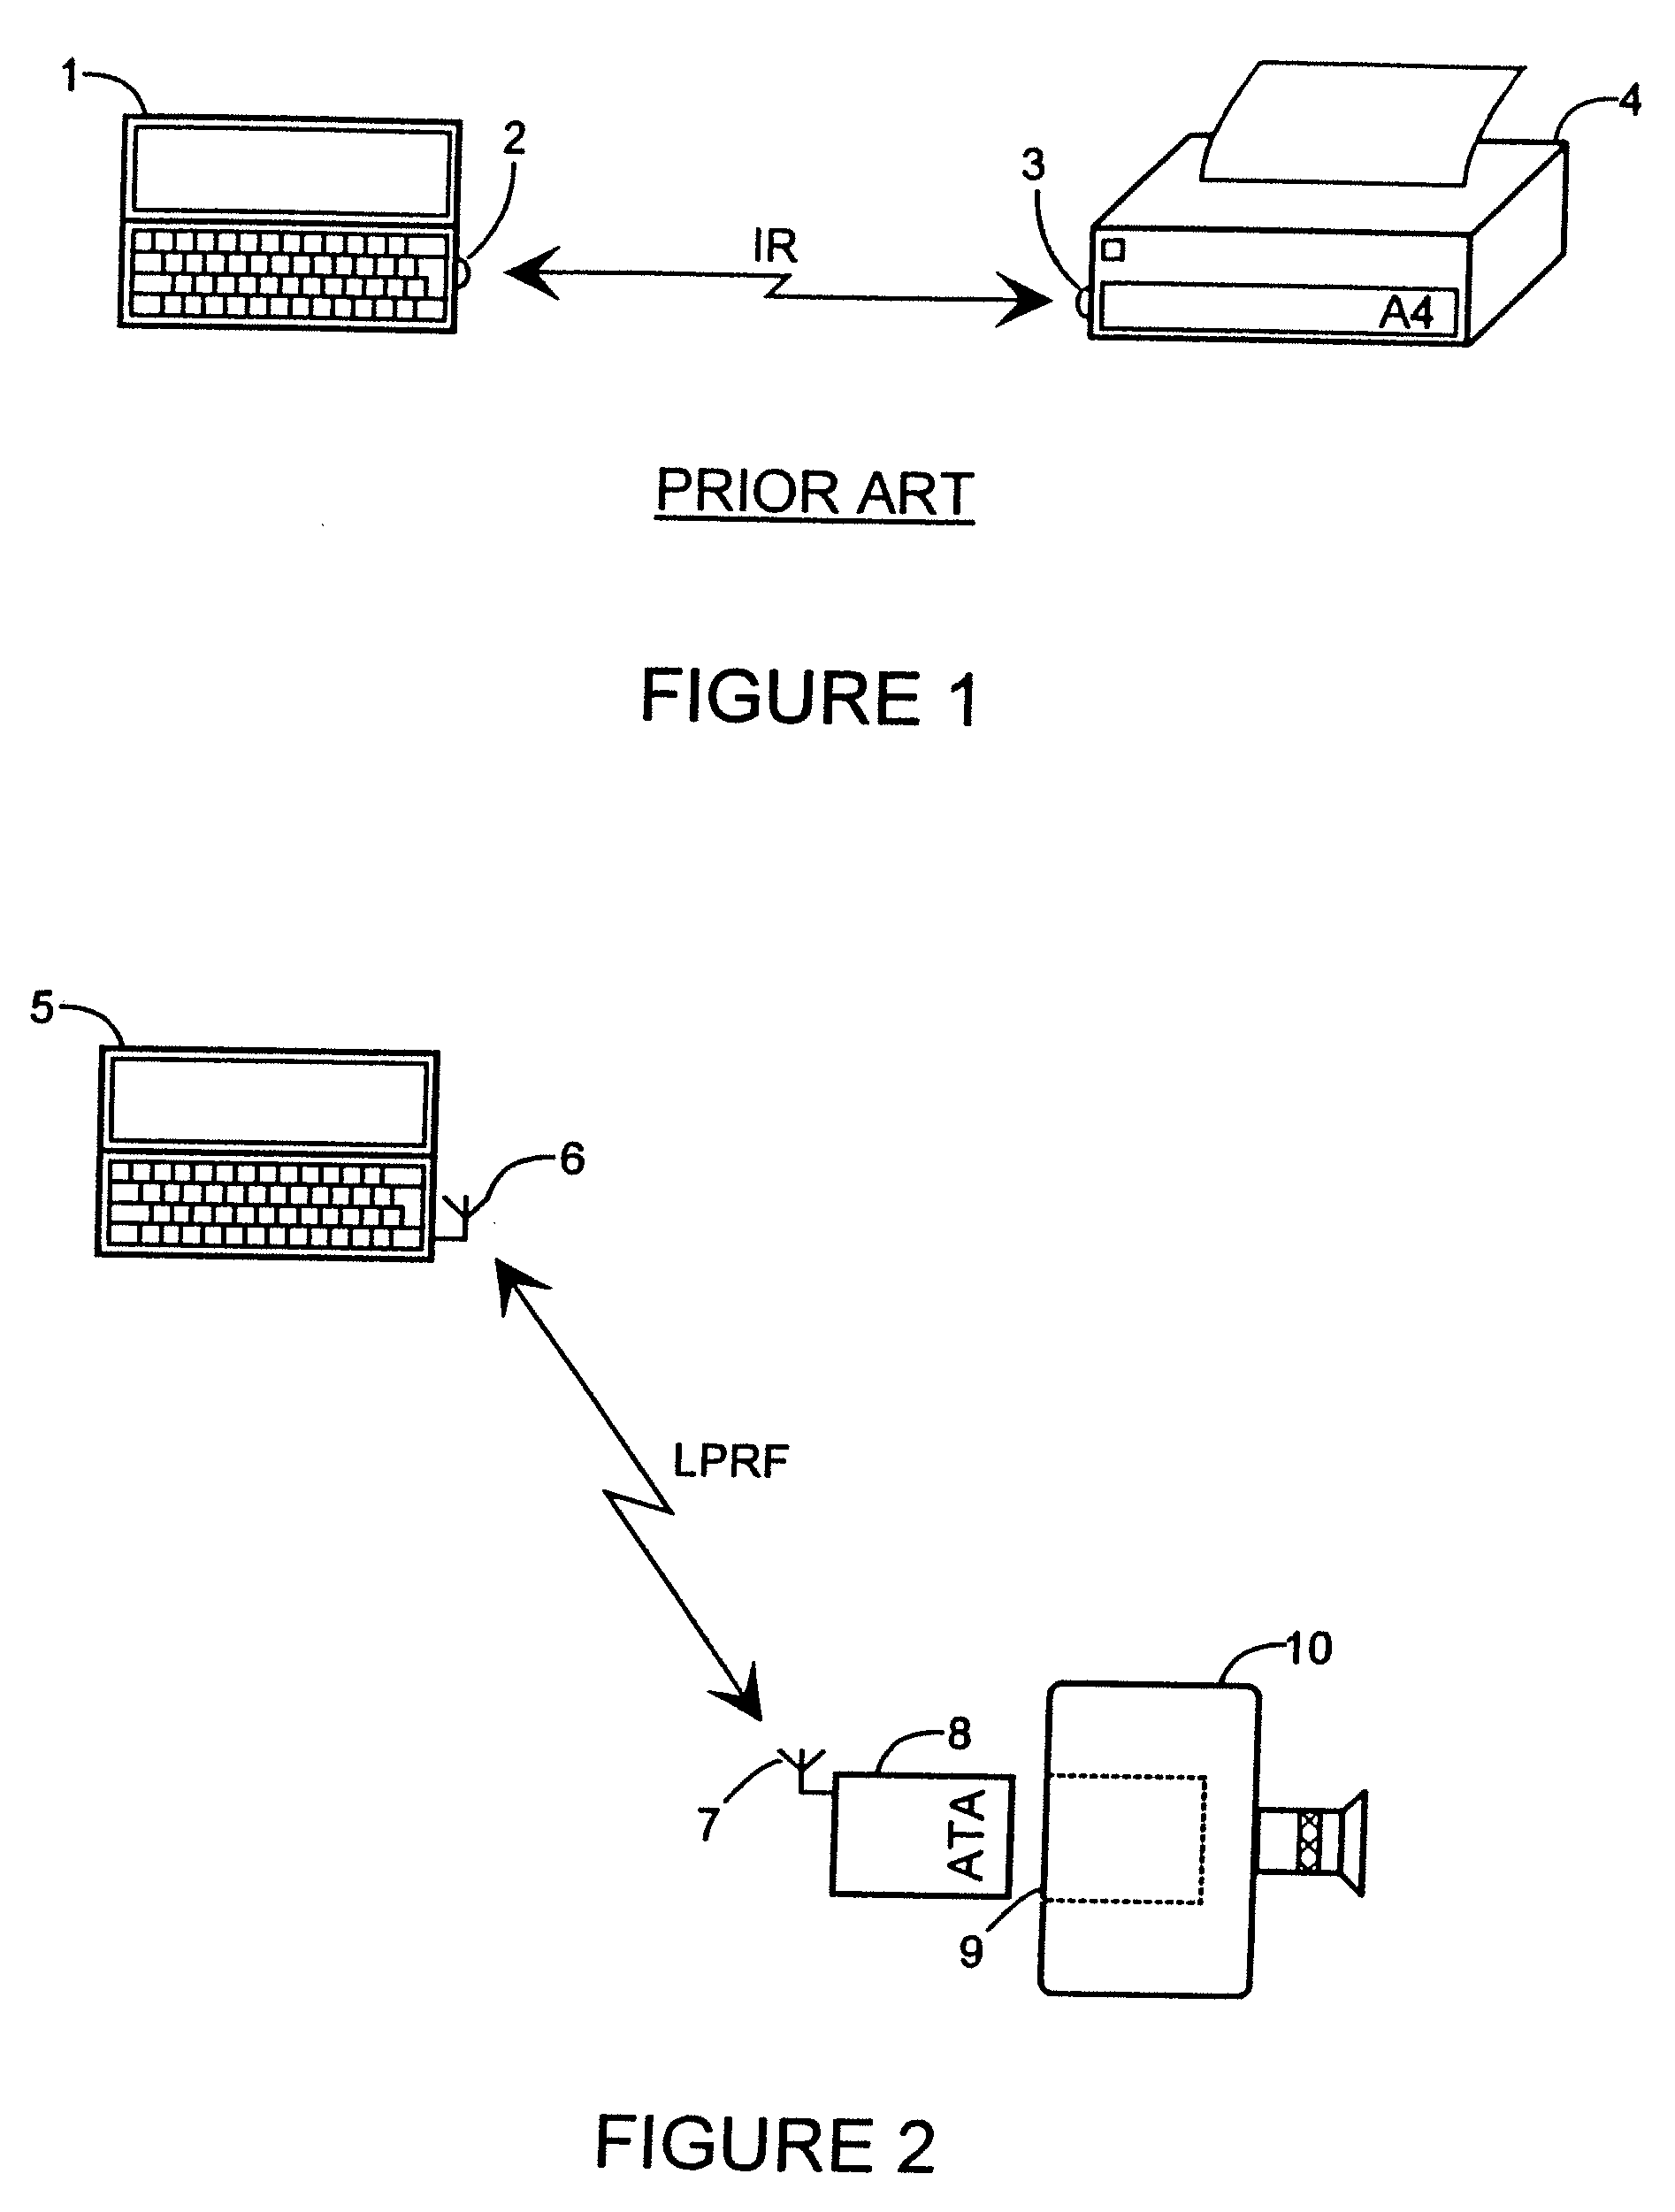 Method for Data Communication between a Wireless Device and an Electronic Device, and a Data Communication Device